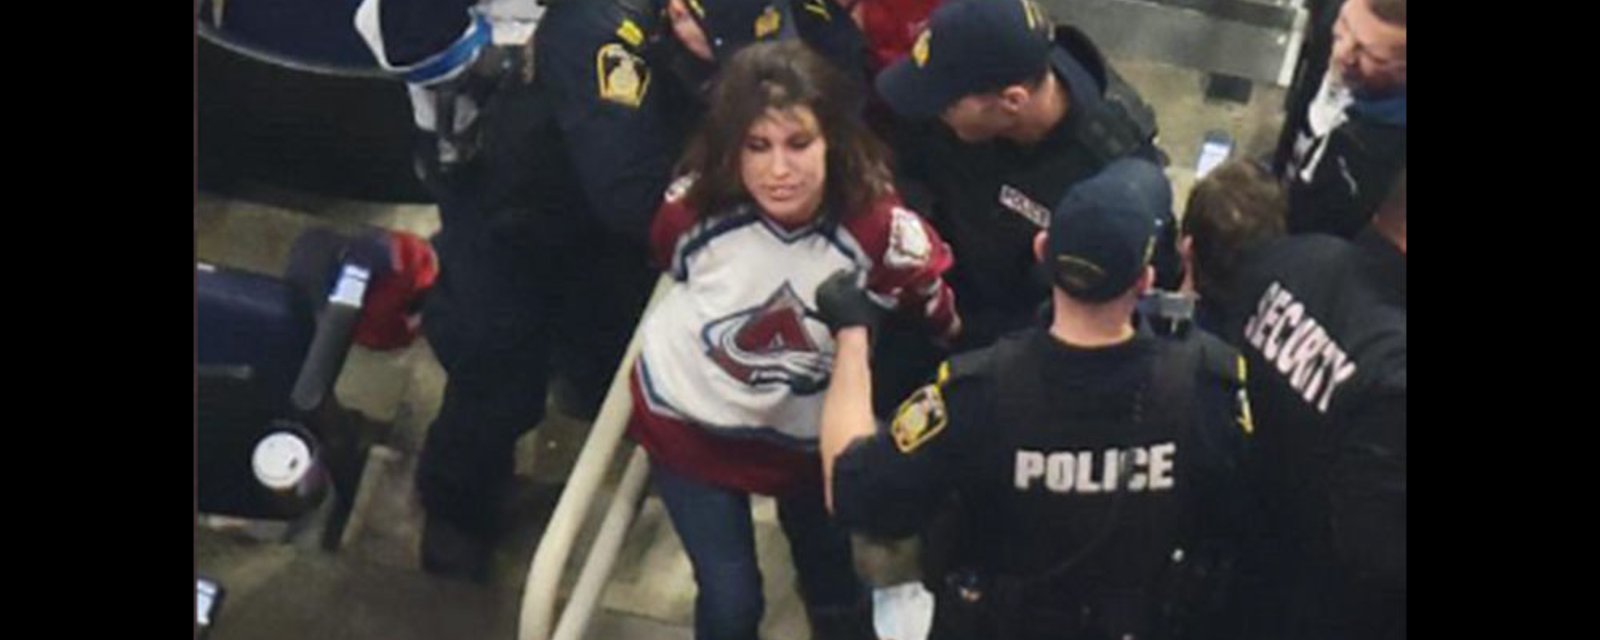 Female Avs fan knocks out Jets fan, leaves him bloodied and then cackles while being hauled off in cuffs